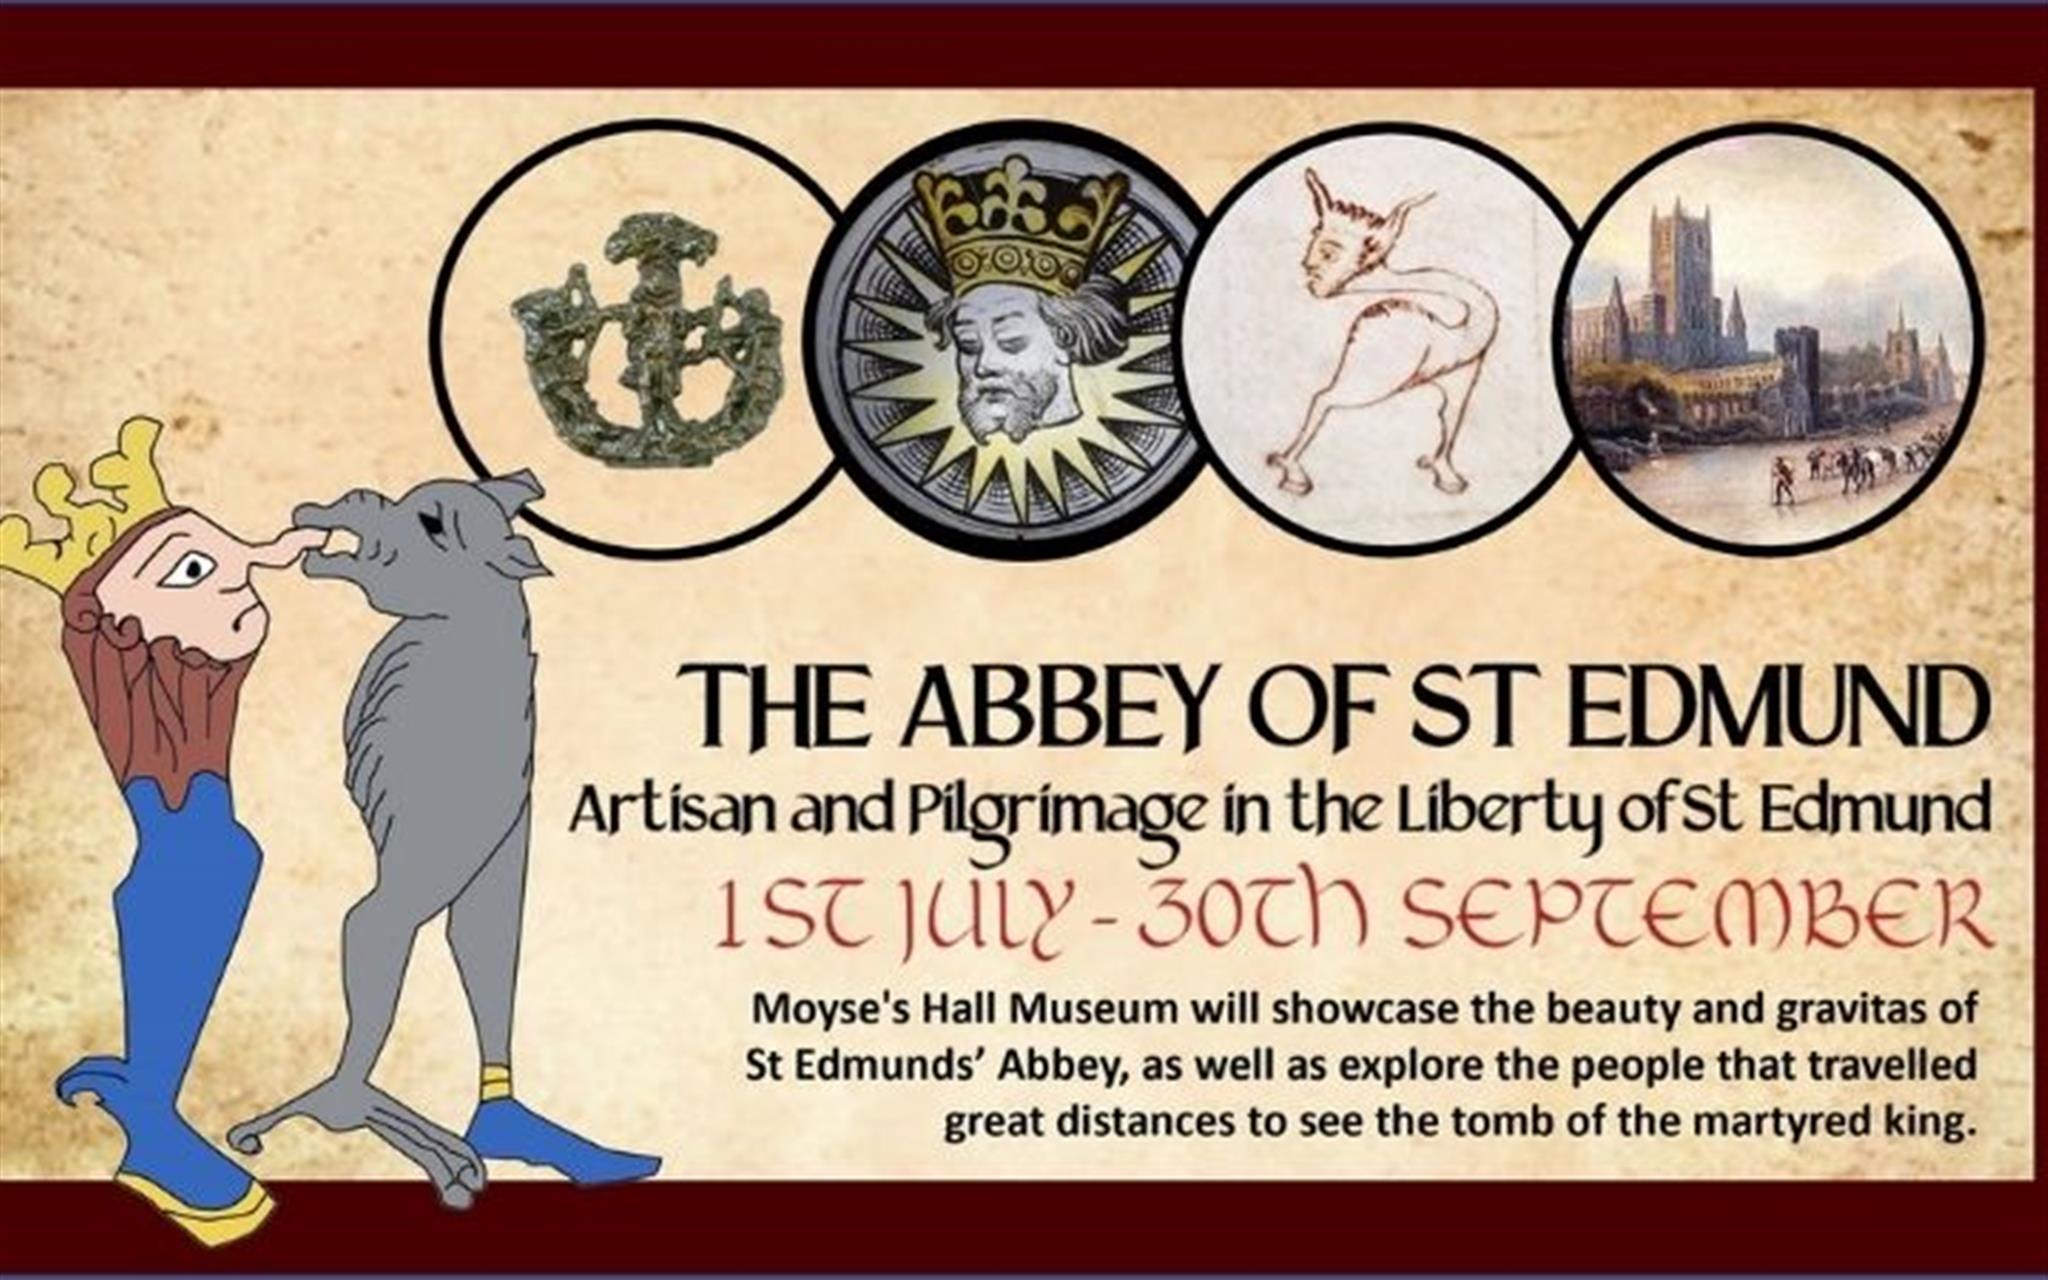 The Abbey of St Edmund: Artisan and Pilgrimage in the Liberty of St Edmund